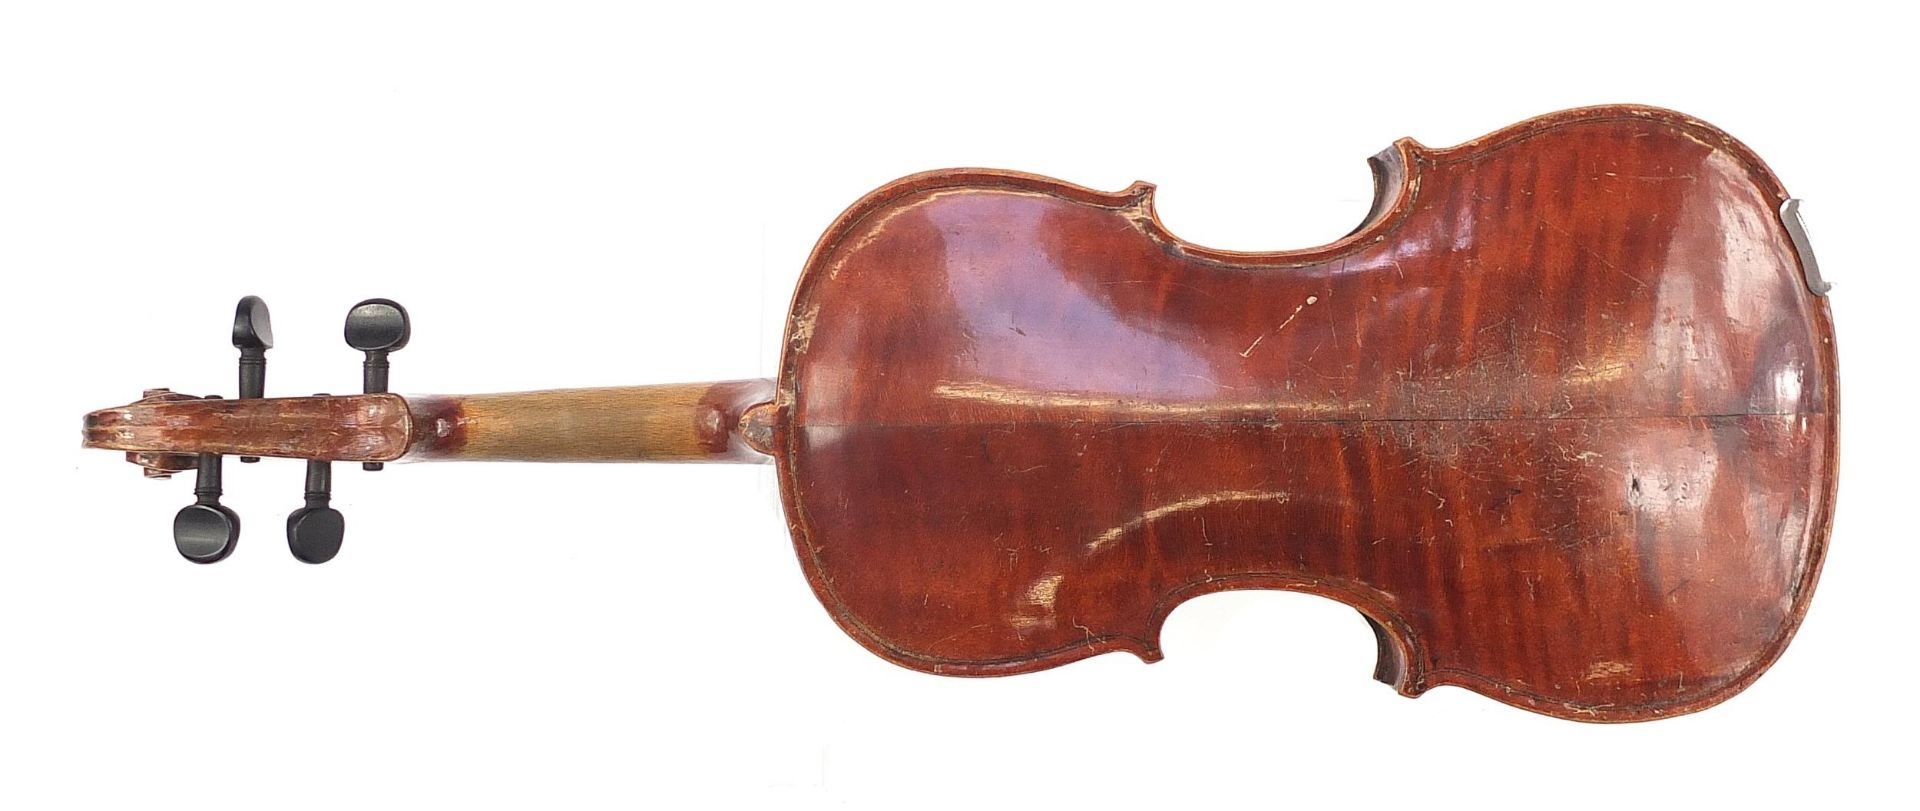 Old wooden violin with two bows and protective case, the violin back 14 inches in length, one violin - Image 8 of 11